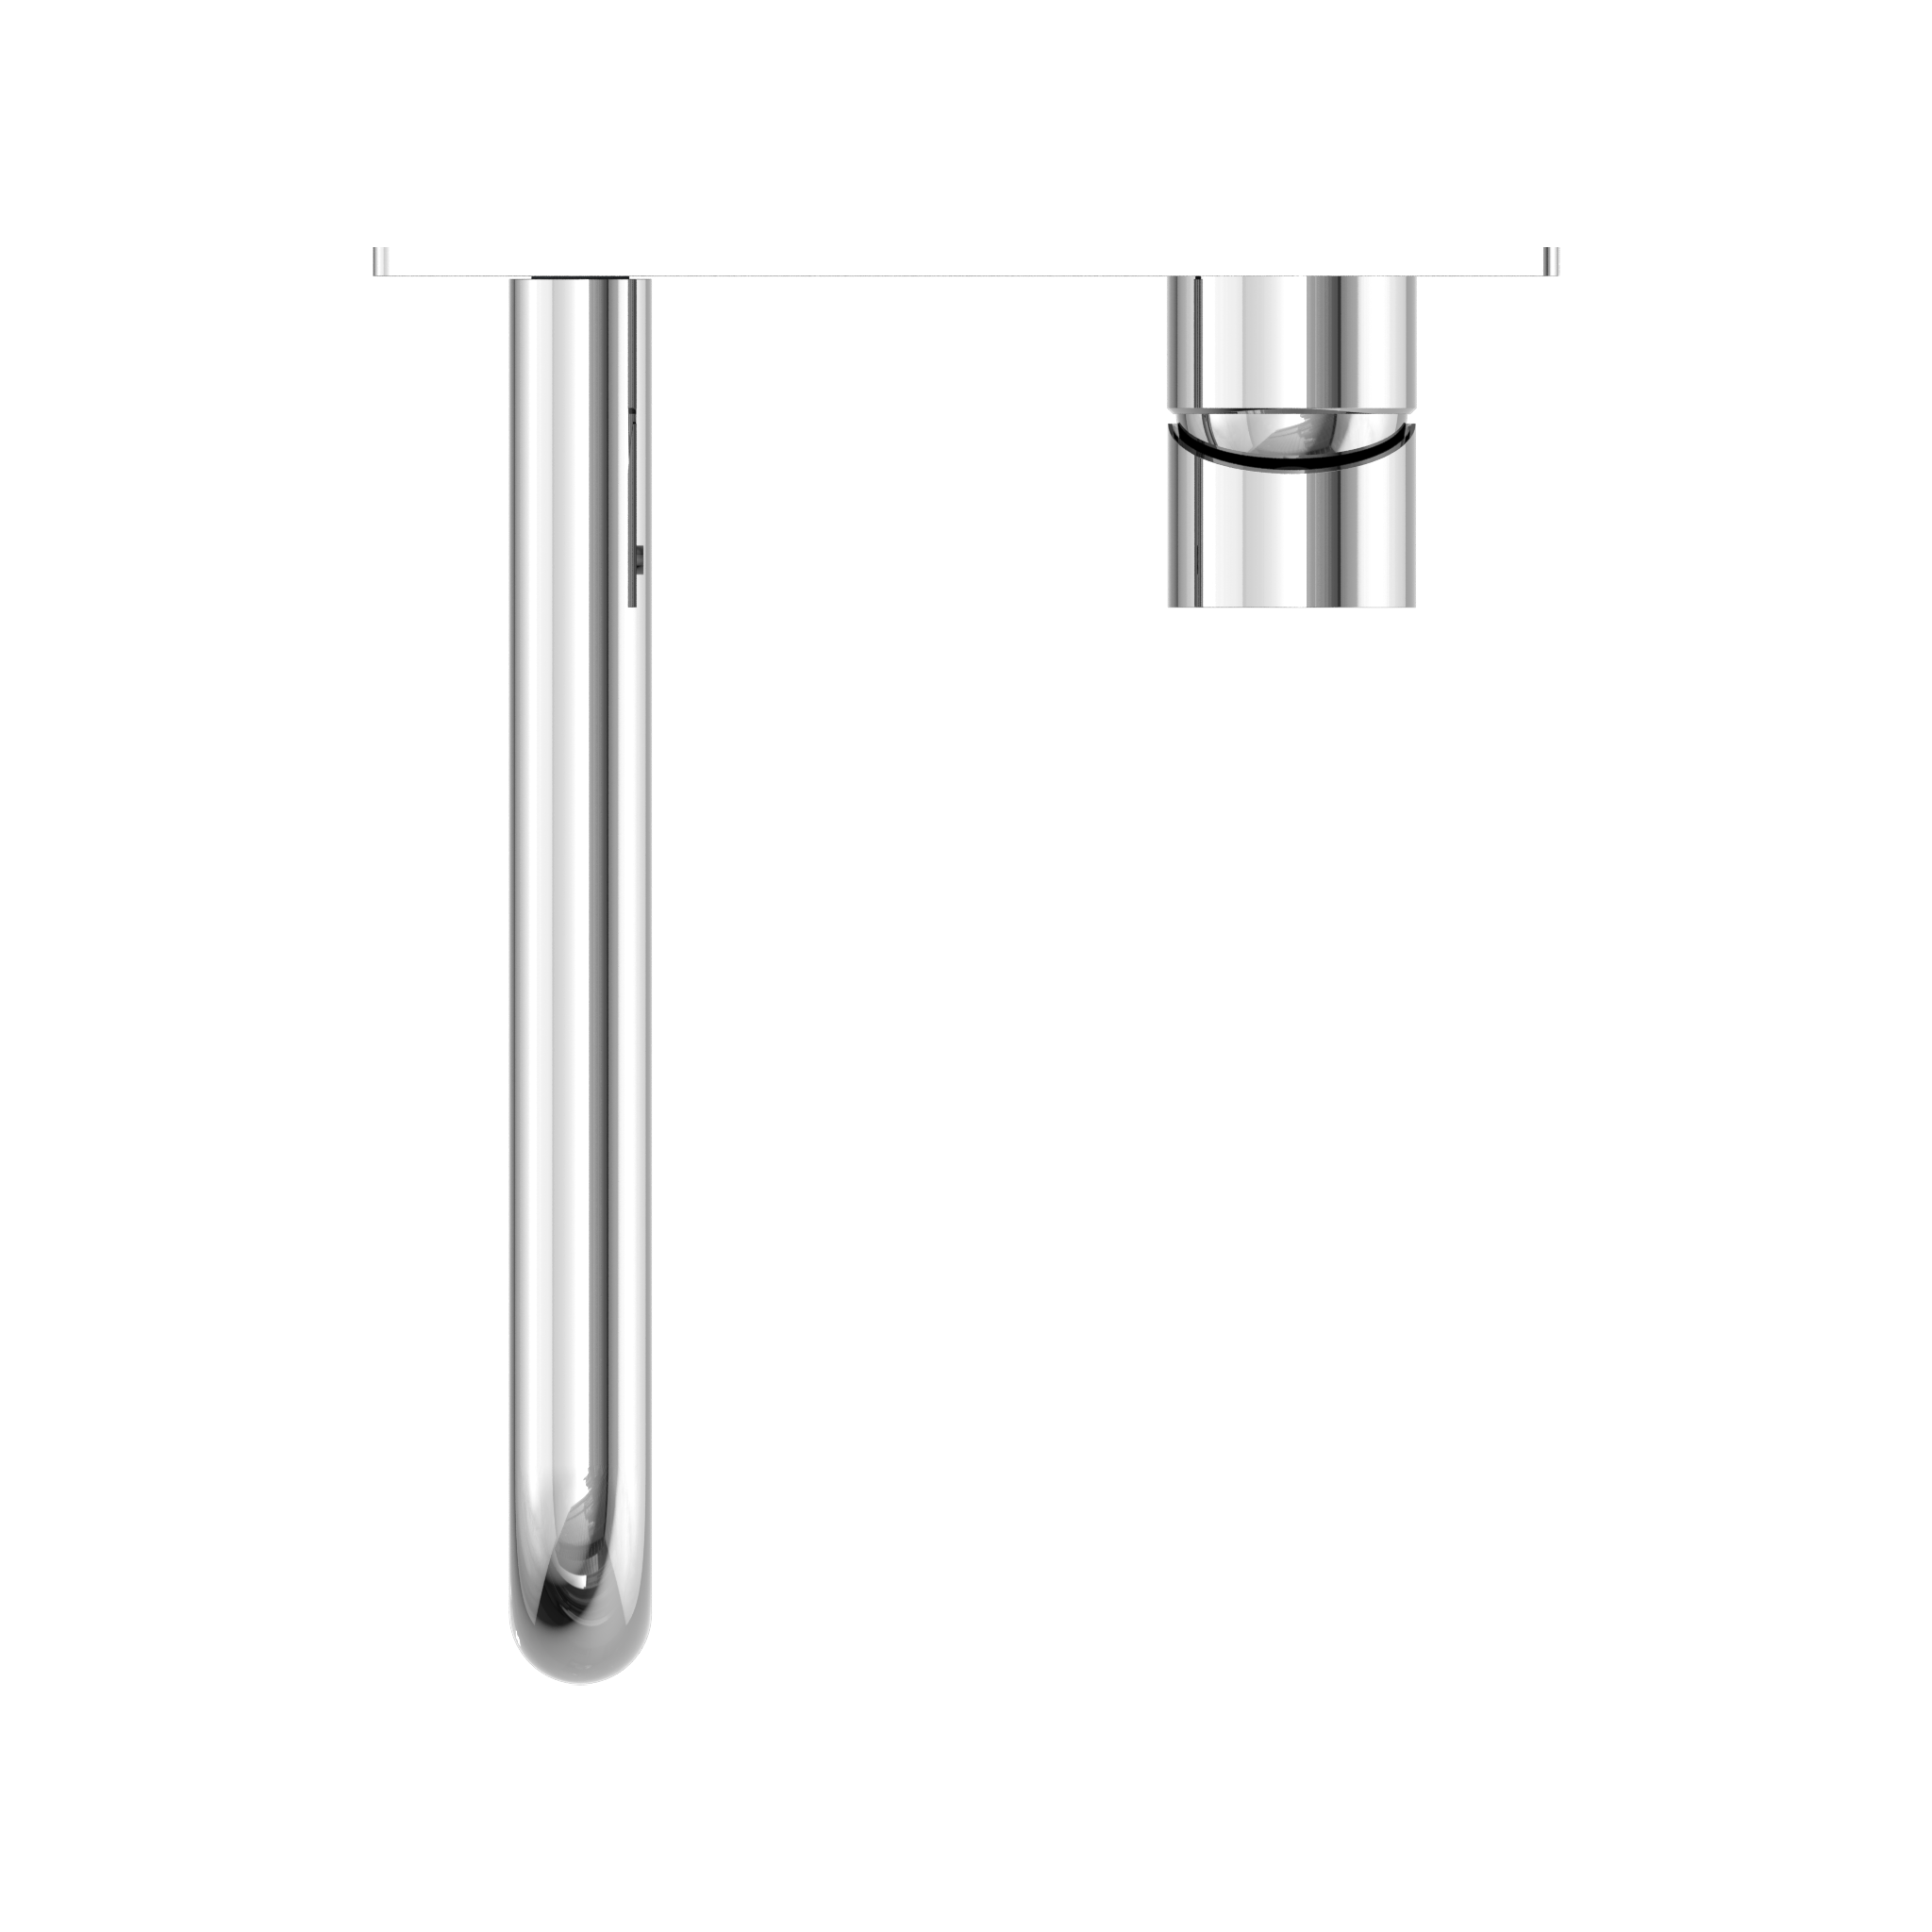 NERO MECCA WALL BASIN/ BATH MIXER CHROME (AVAILABLE IN 120MM, 160MM, 185MM, 230MM AND 260MM)